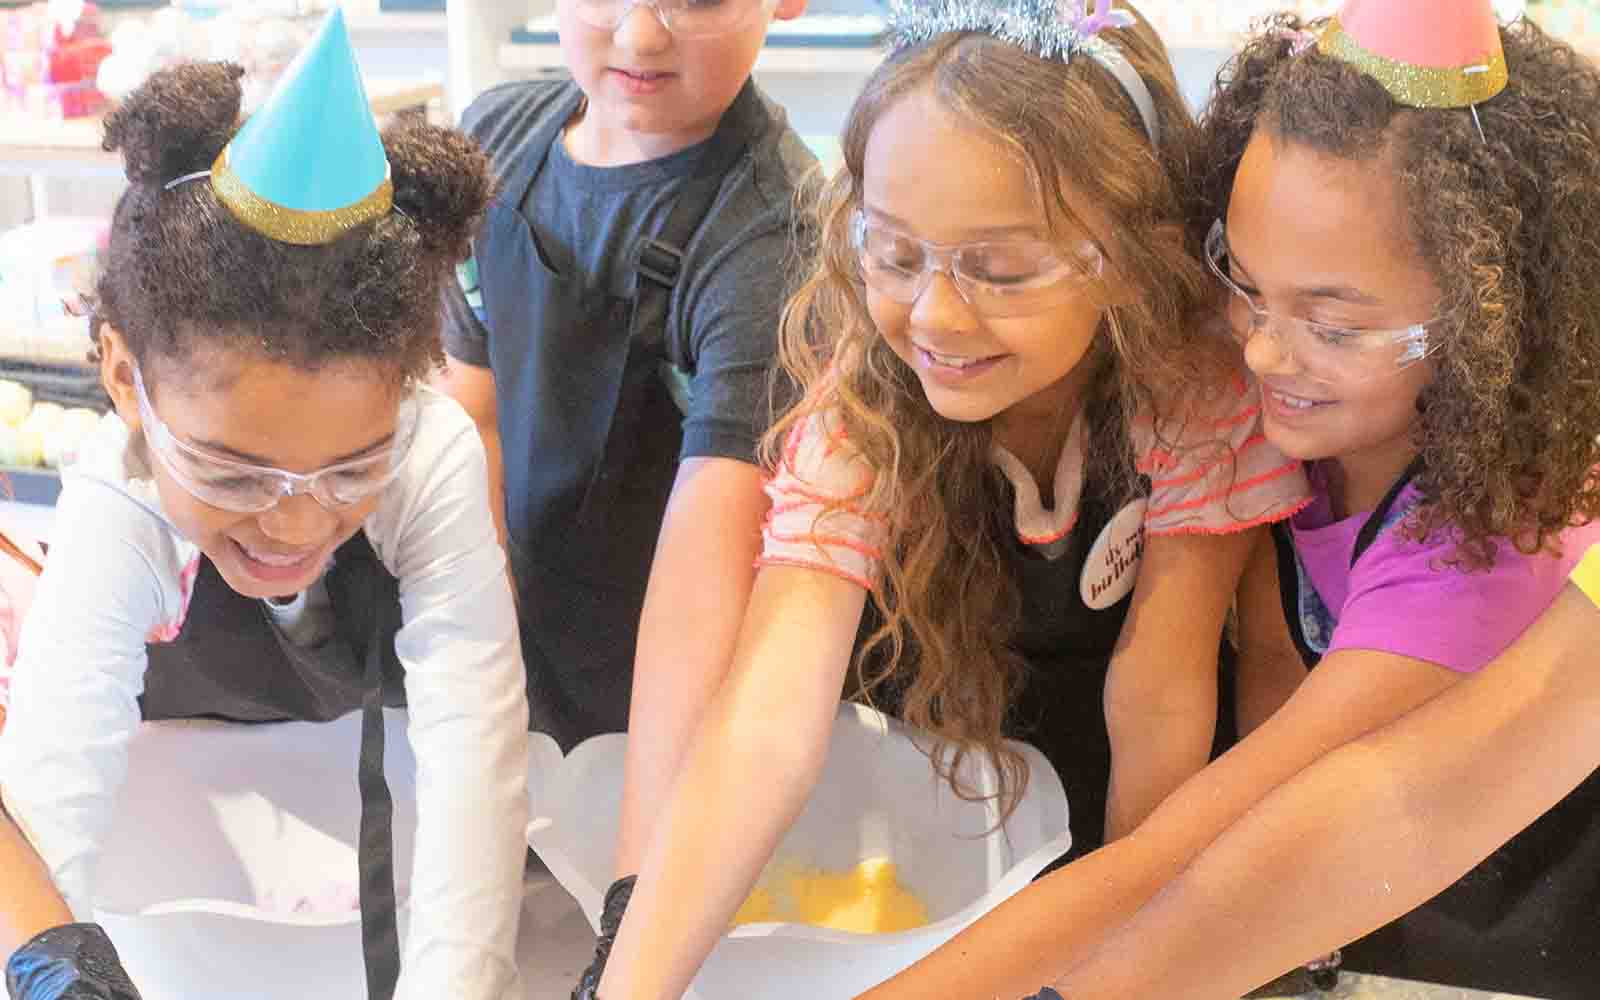 Four children making bath bombs at Buff City Soap while wearing protective glasses and party hats.